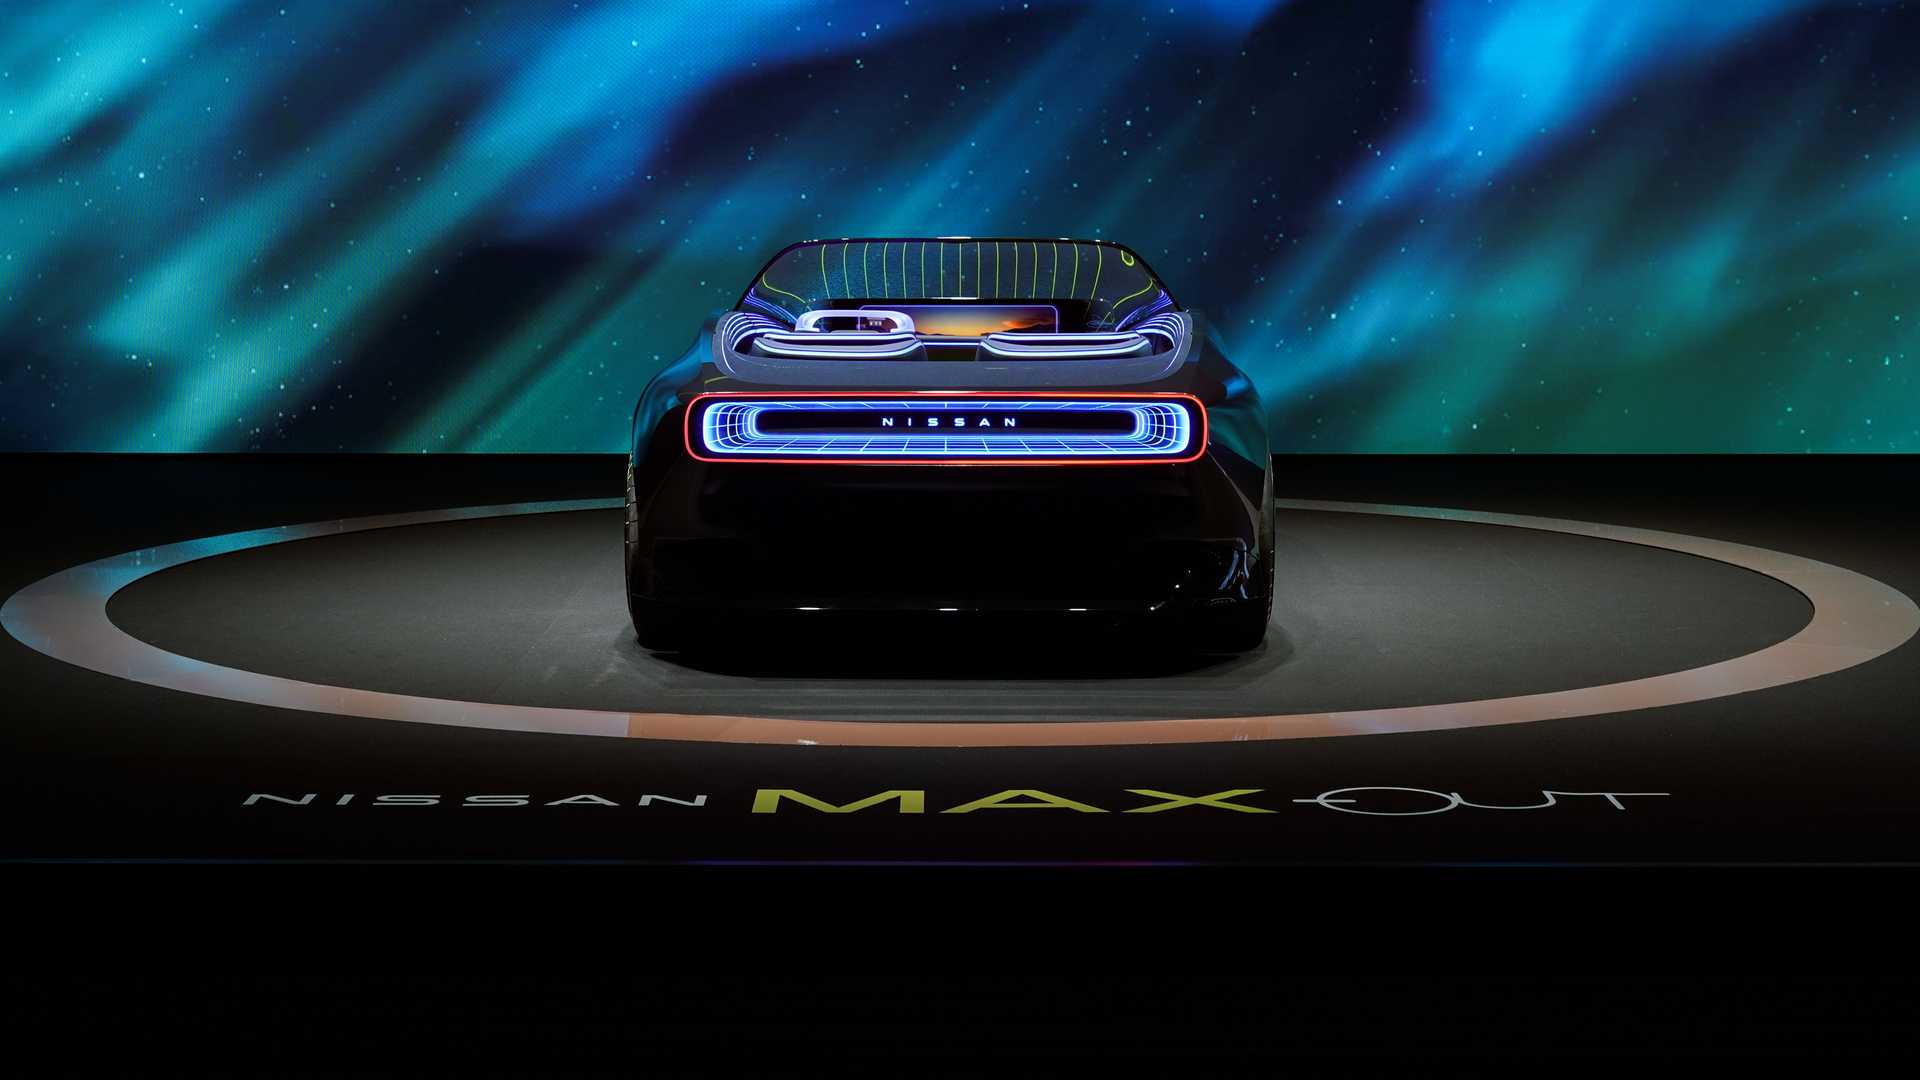 nissan-max-out-convertible-concept-9